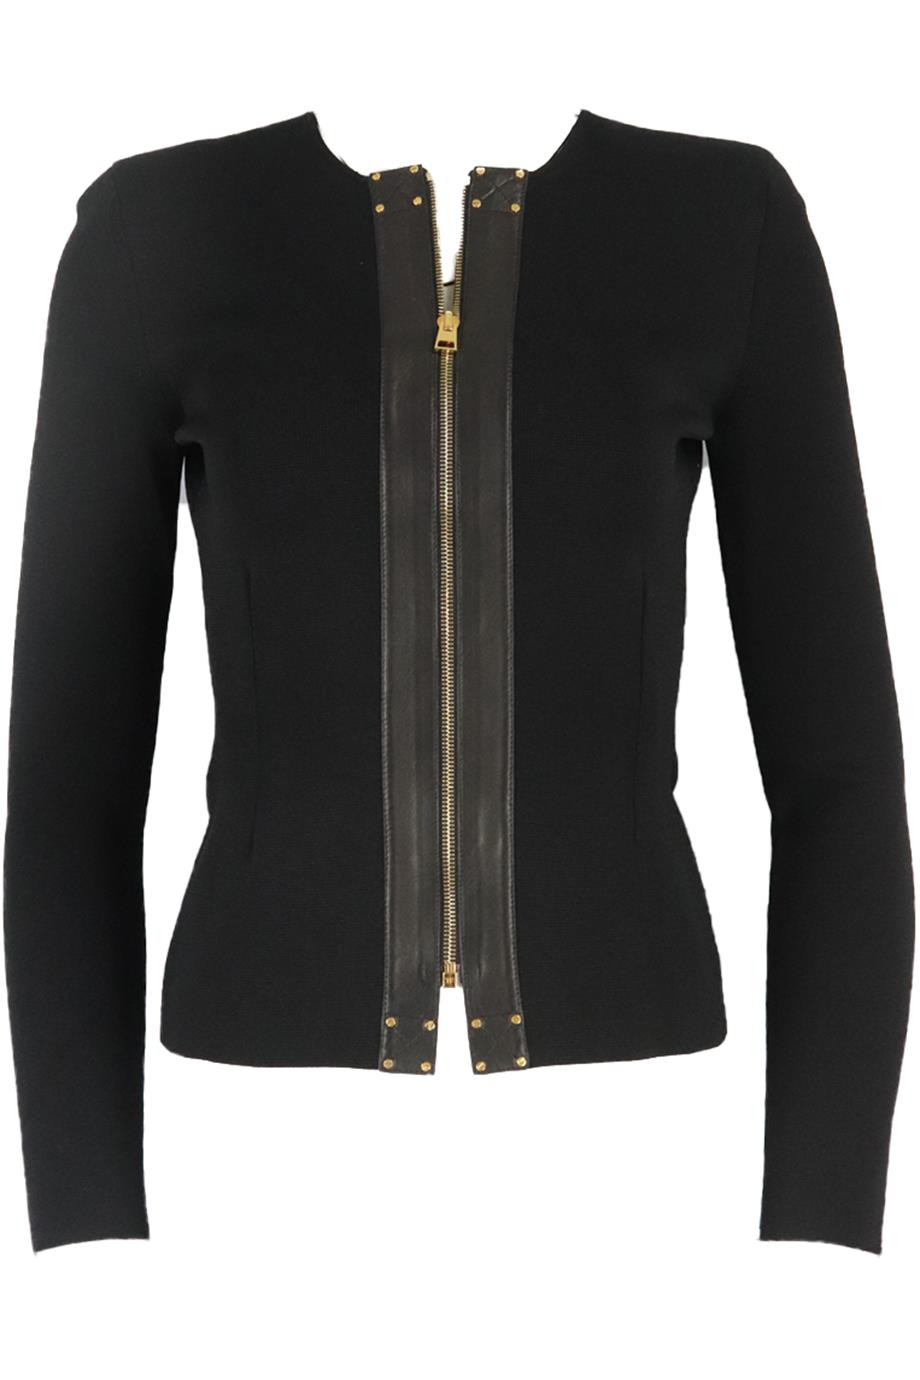 TOM FORD LEATHER TRIMMED STRETCH KNIT JACKET IT 36 UK 4